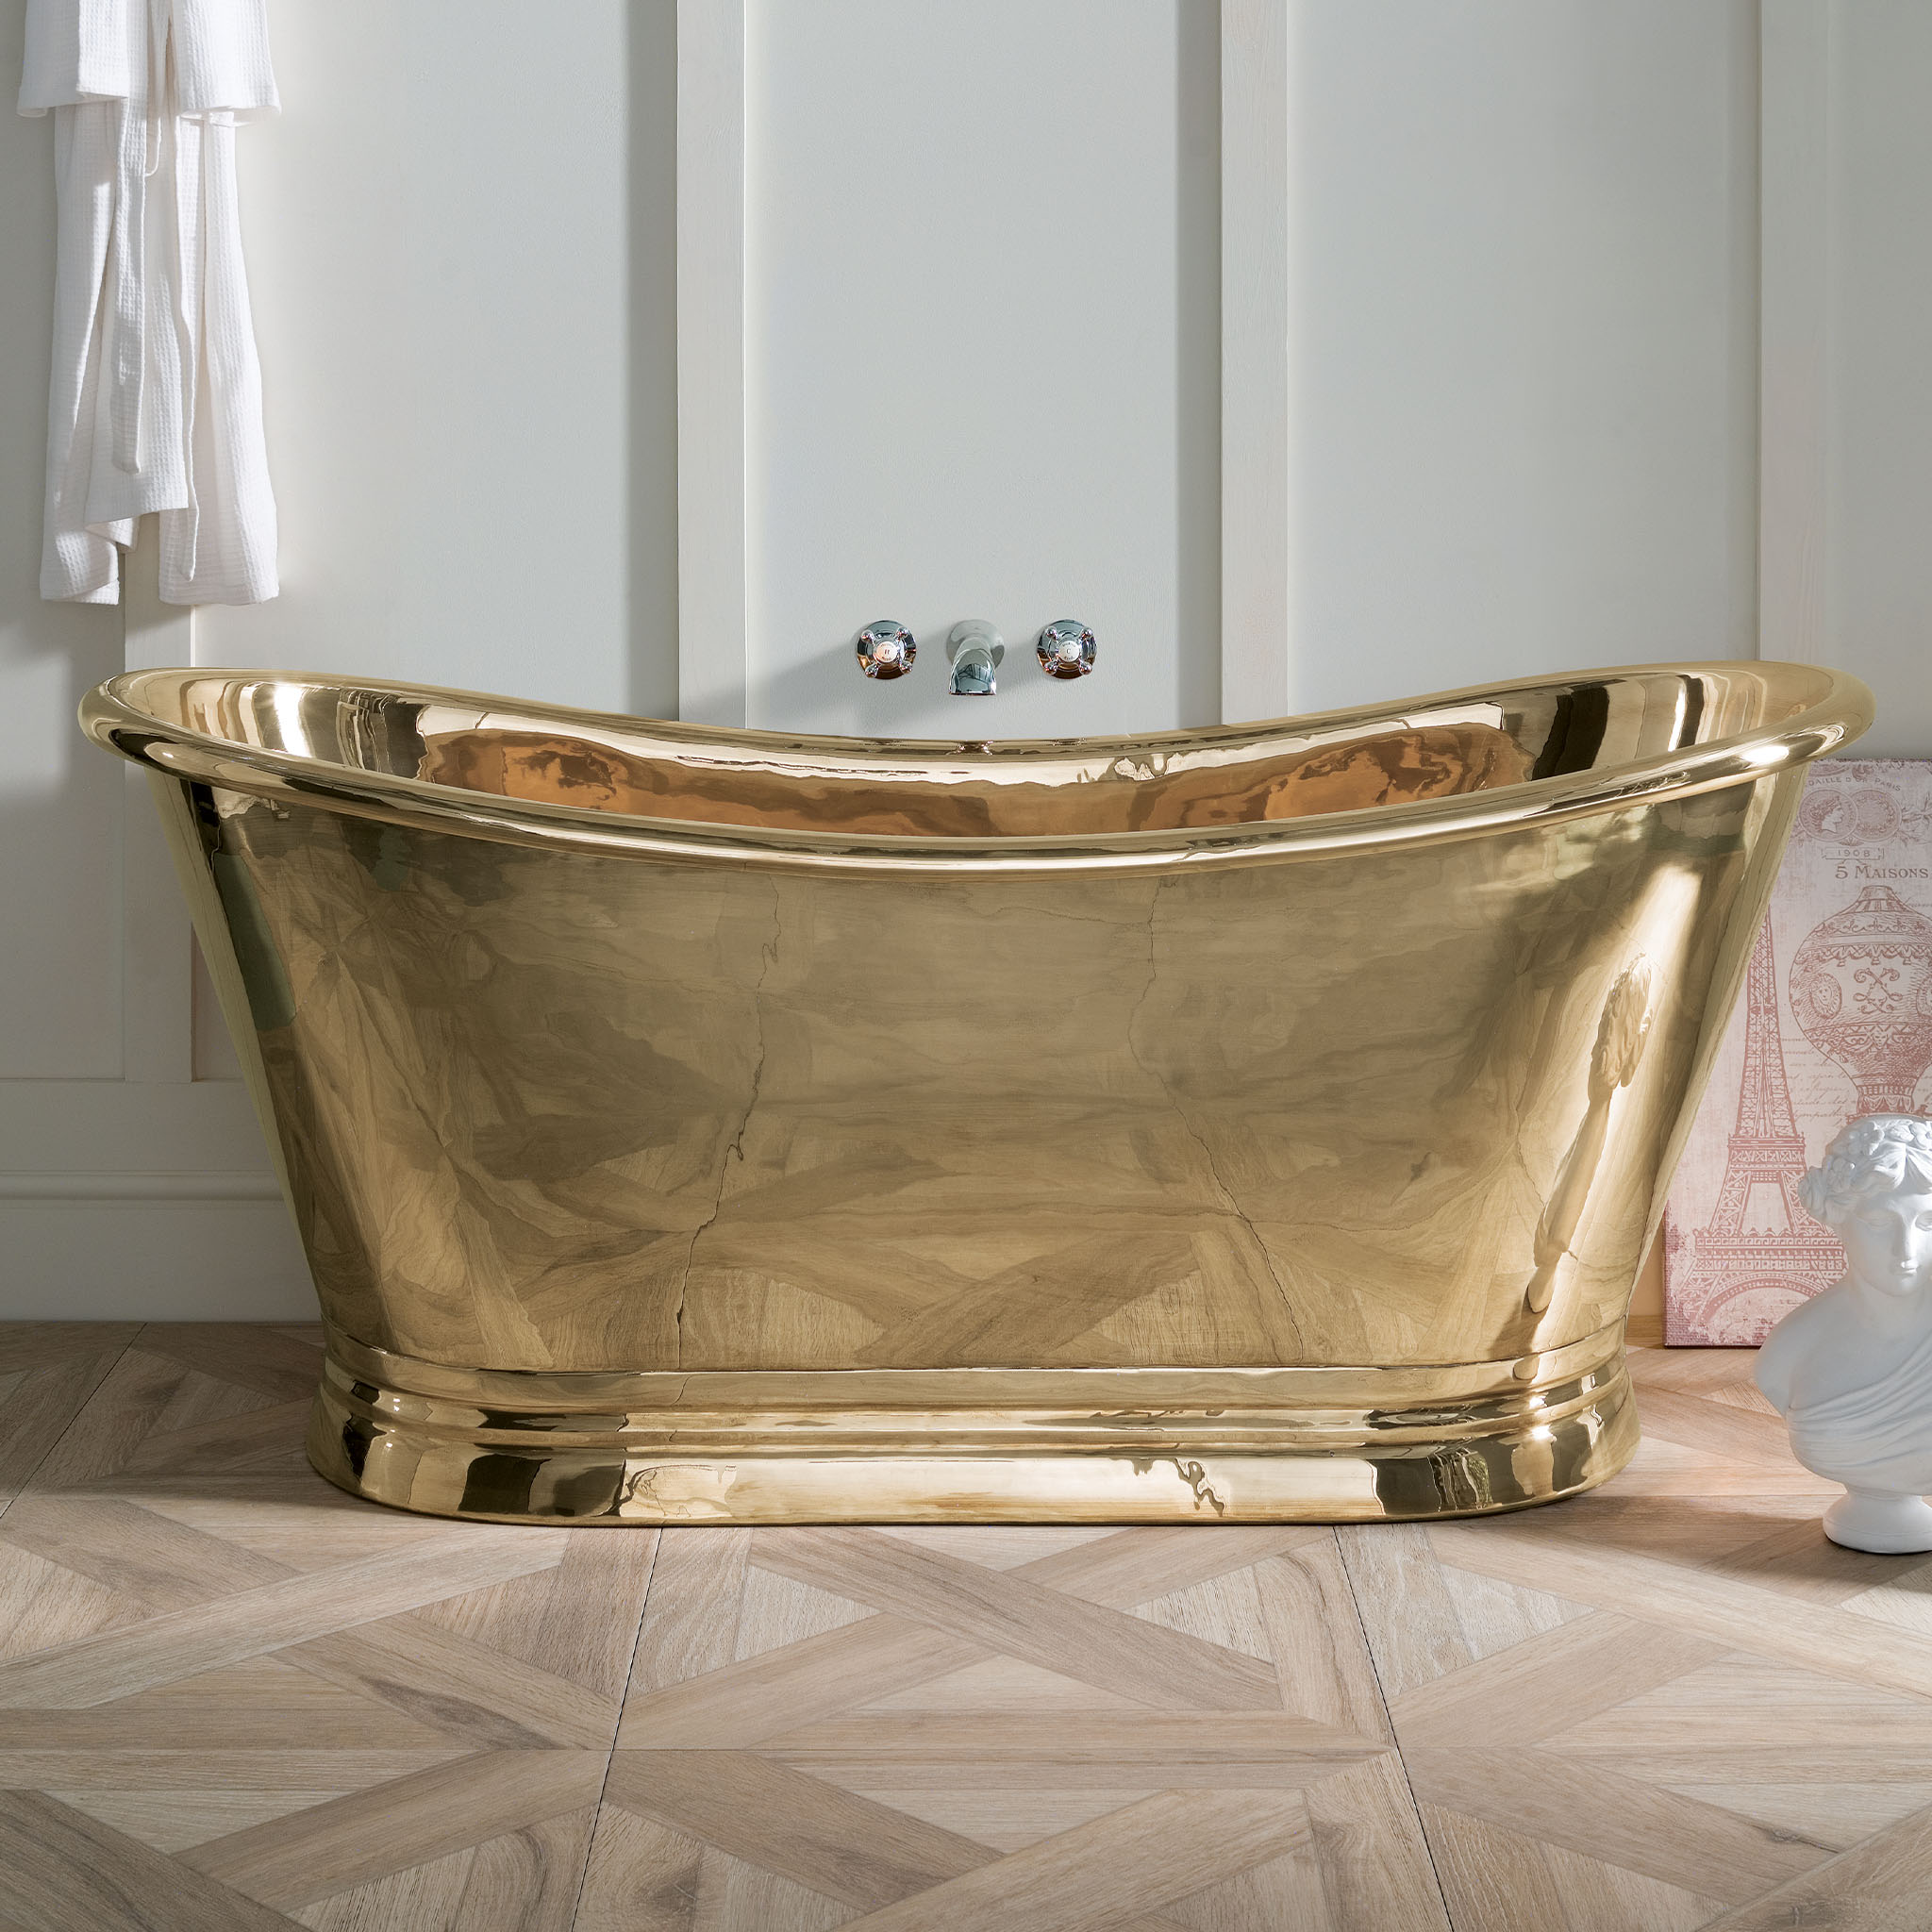 BC Designs Brass Double Ended Roll Top Bath